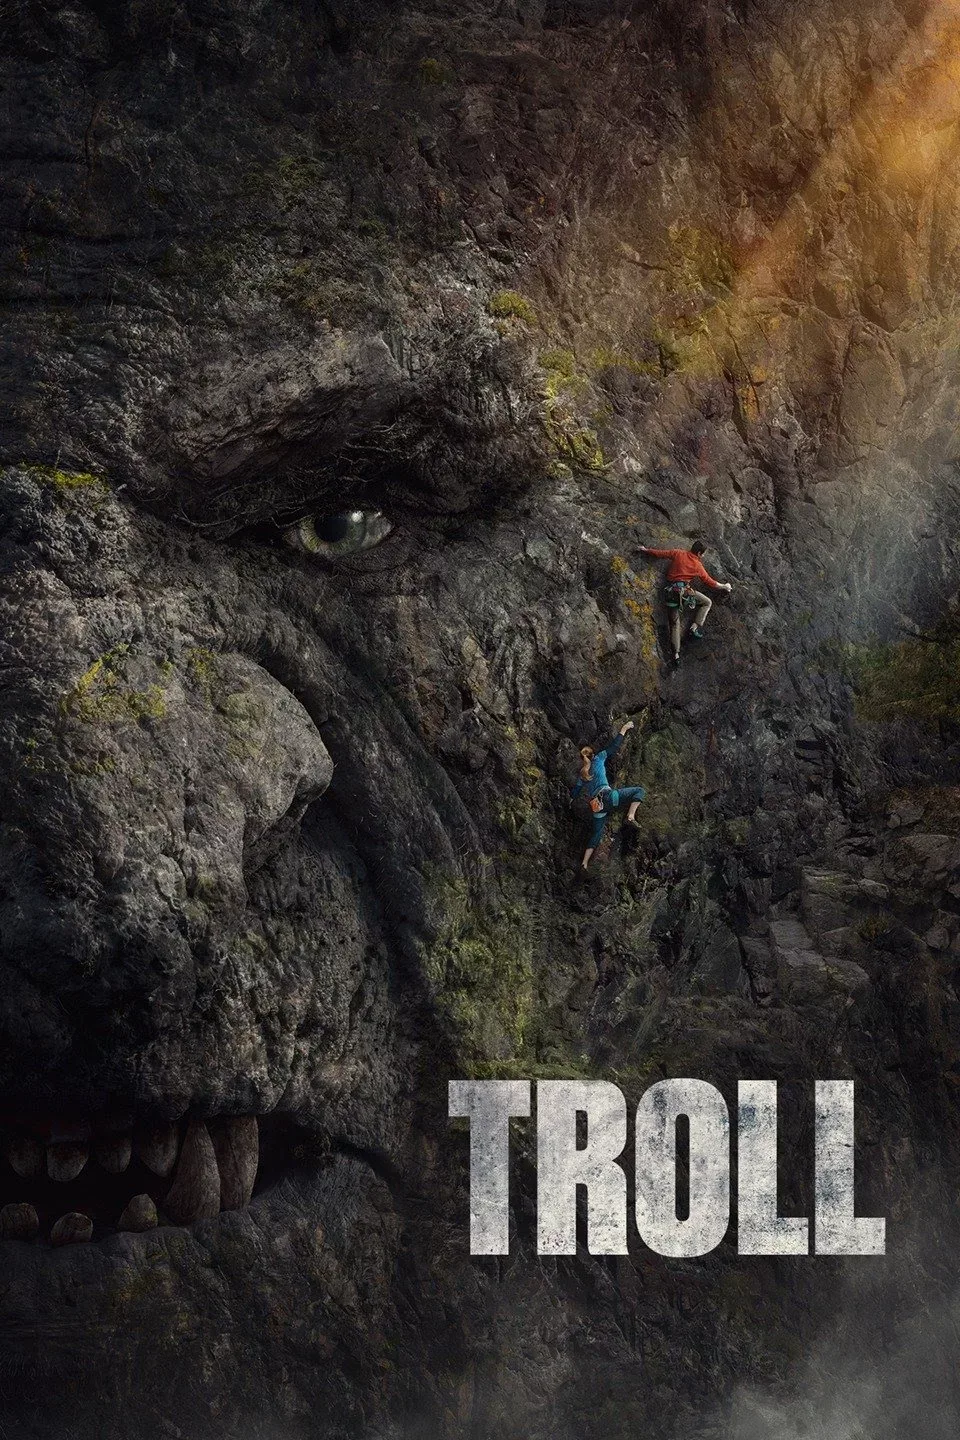 When an ancient troll is awakened in a Norwegian mountain, a ragtag group of heroes must come together to try and stop it from wreaking deadly havoc.